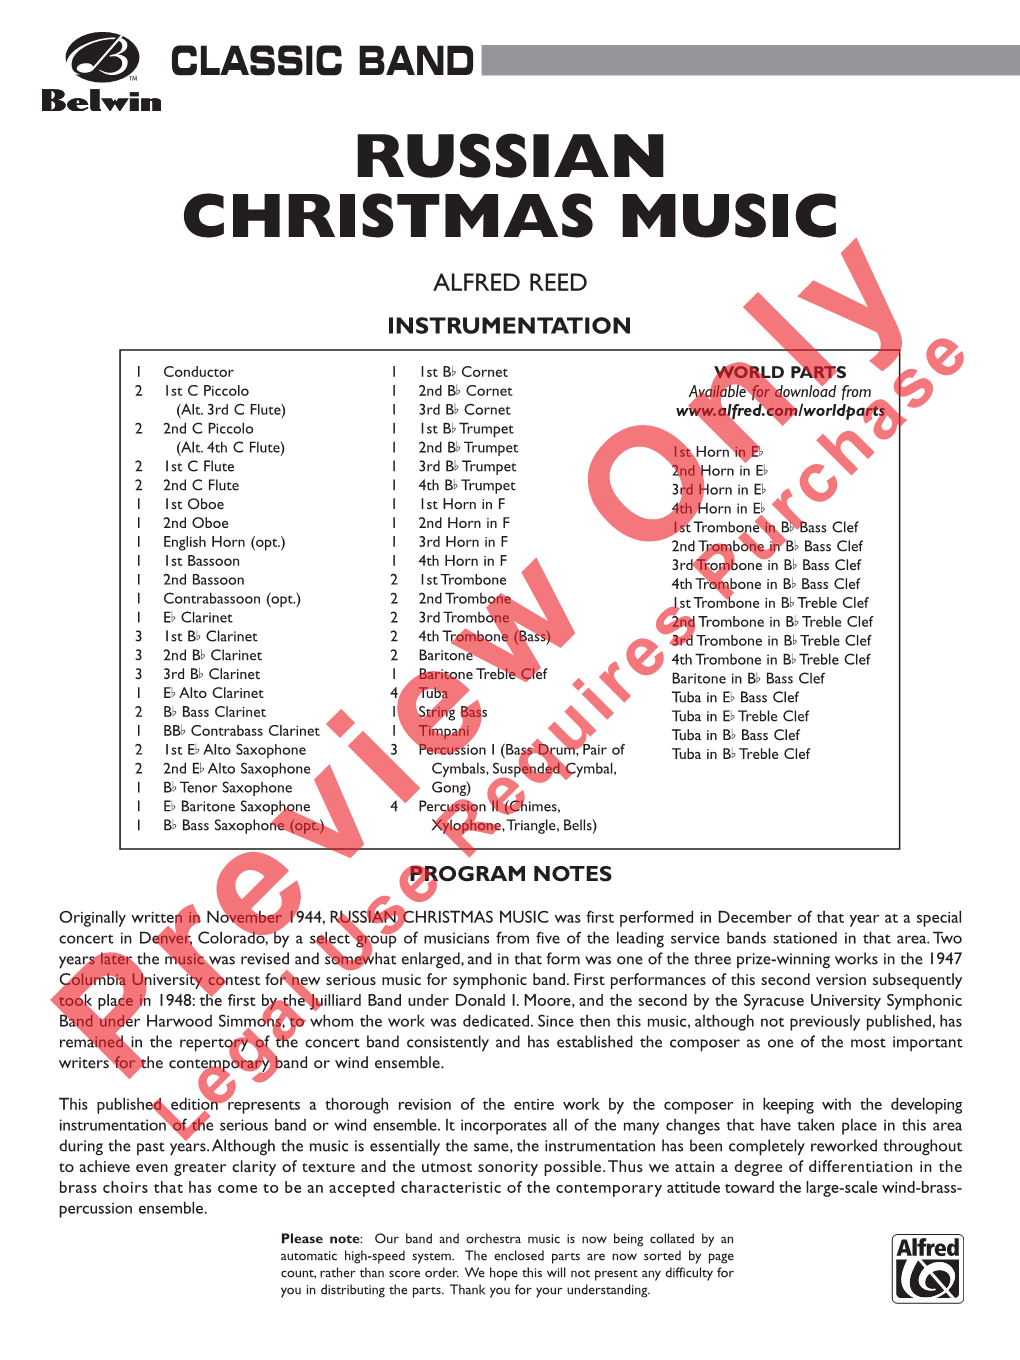 Russian Christmas Music Alfred Reed Instrumentation